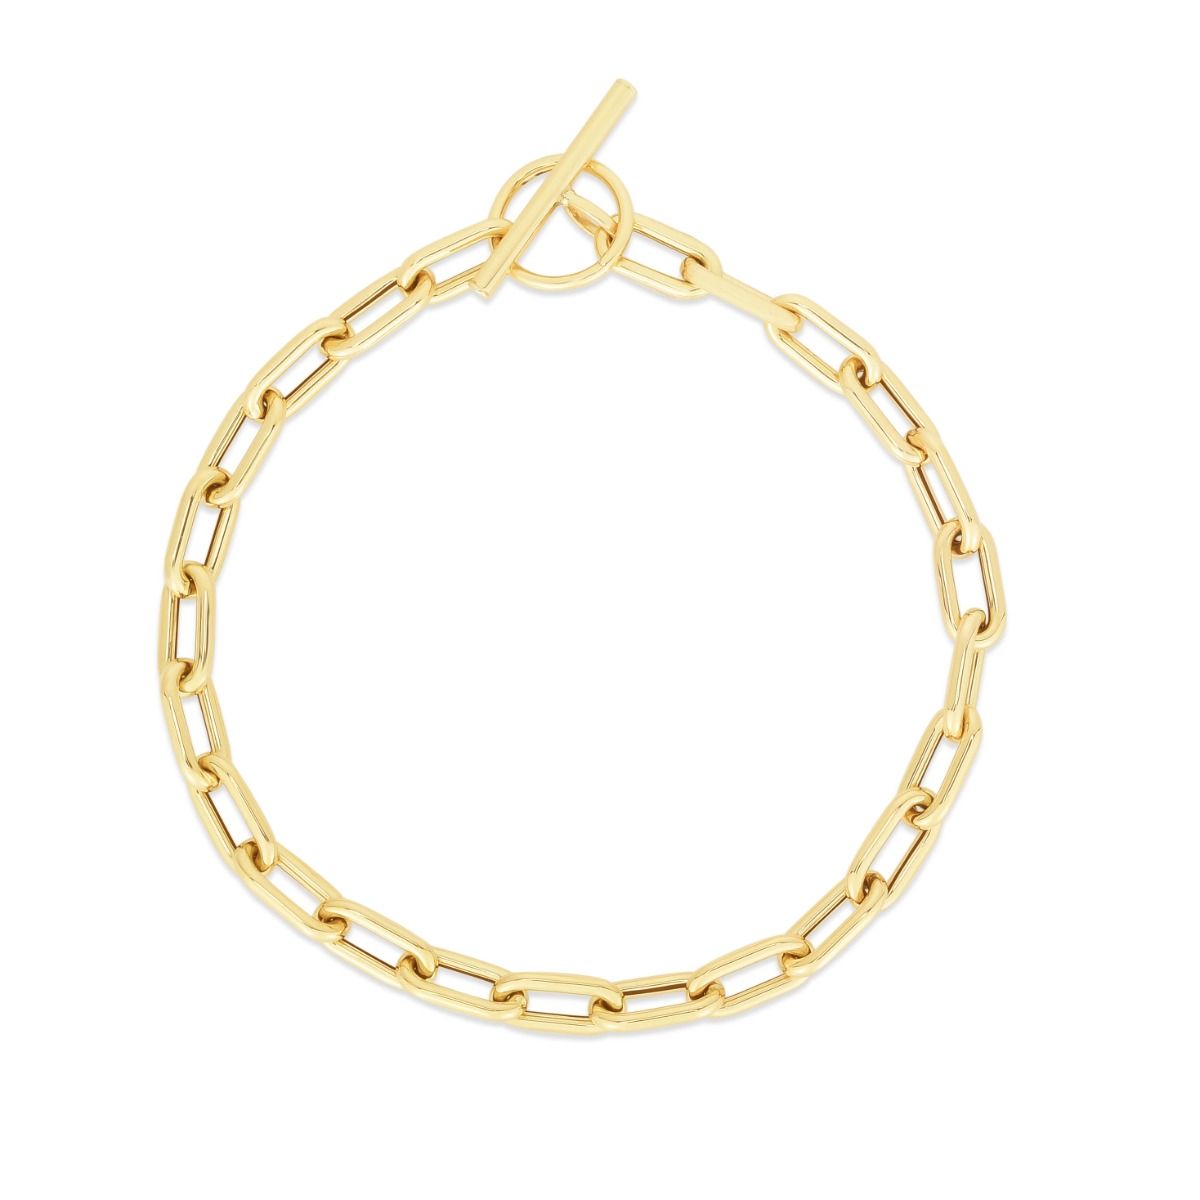 Herco 14K Polished and Twisted Citrine Oval Link 8.5 inch Toggle Bracelet -  Quality Gold